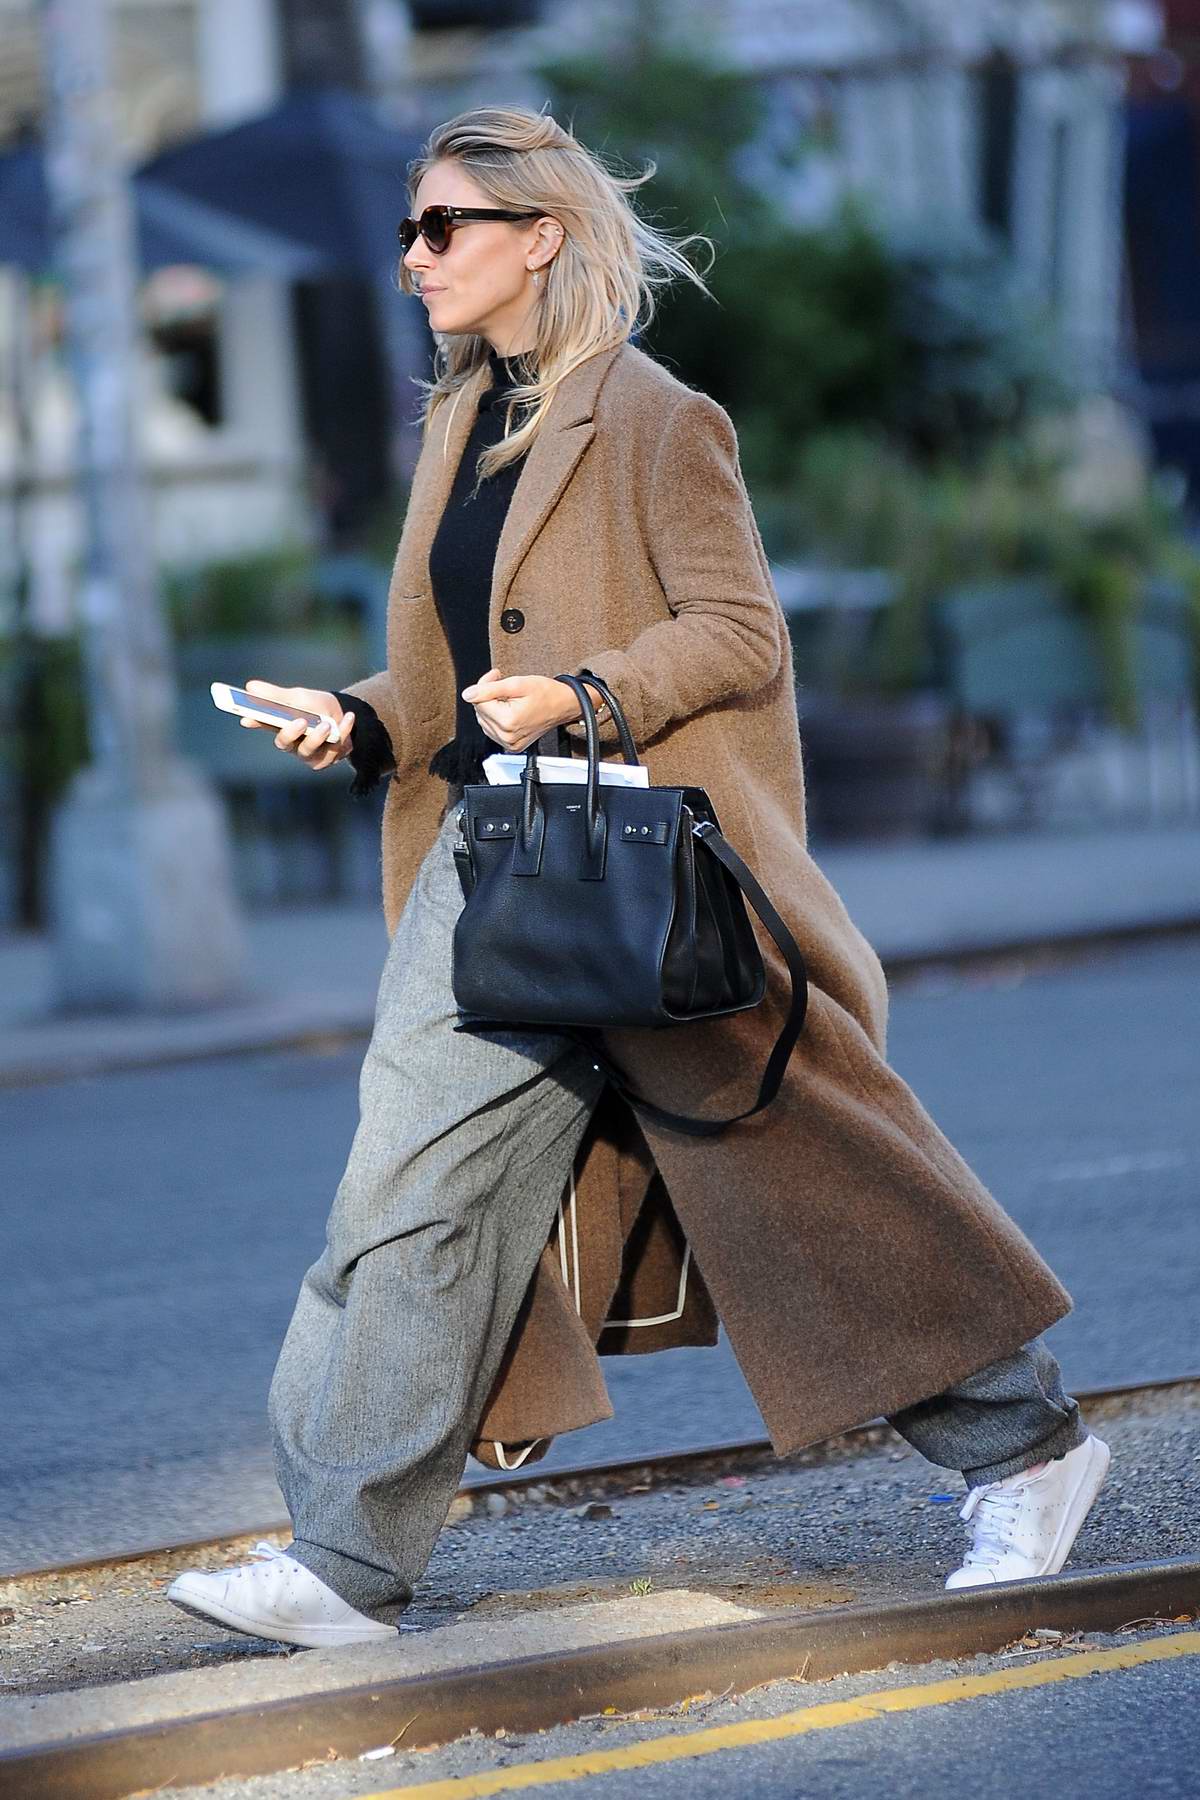 Sienna Miller in a overcoat spotted running errands in New York City